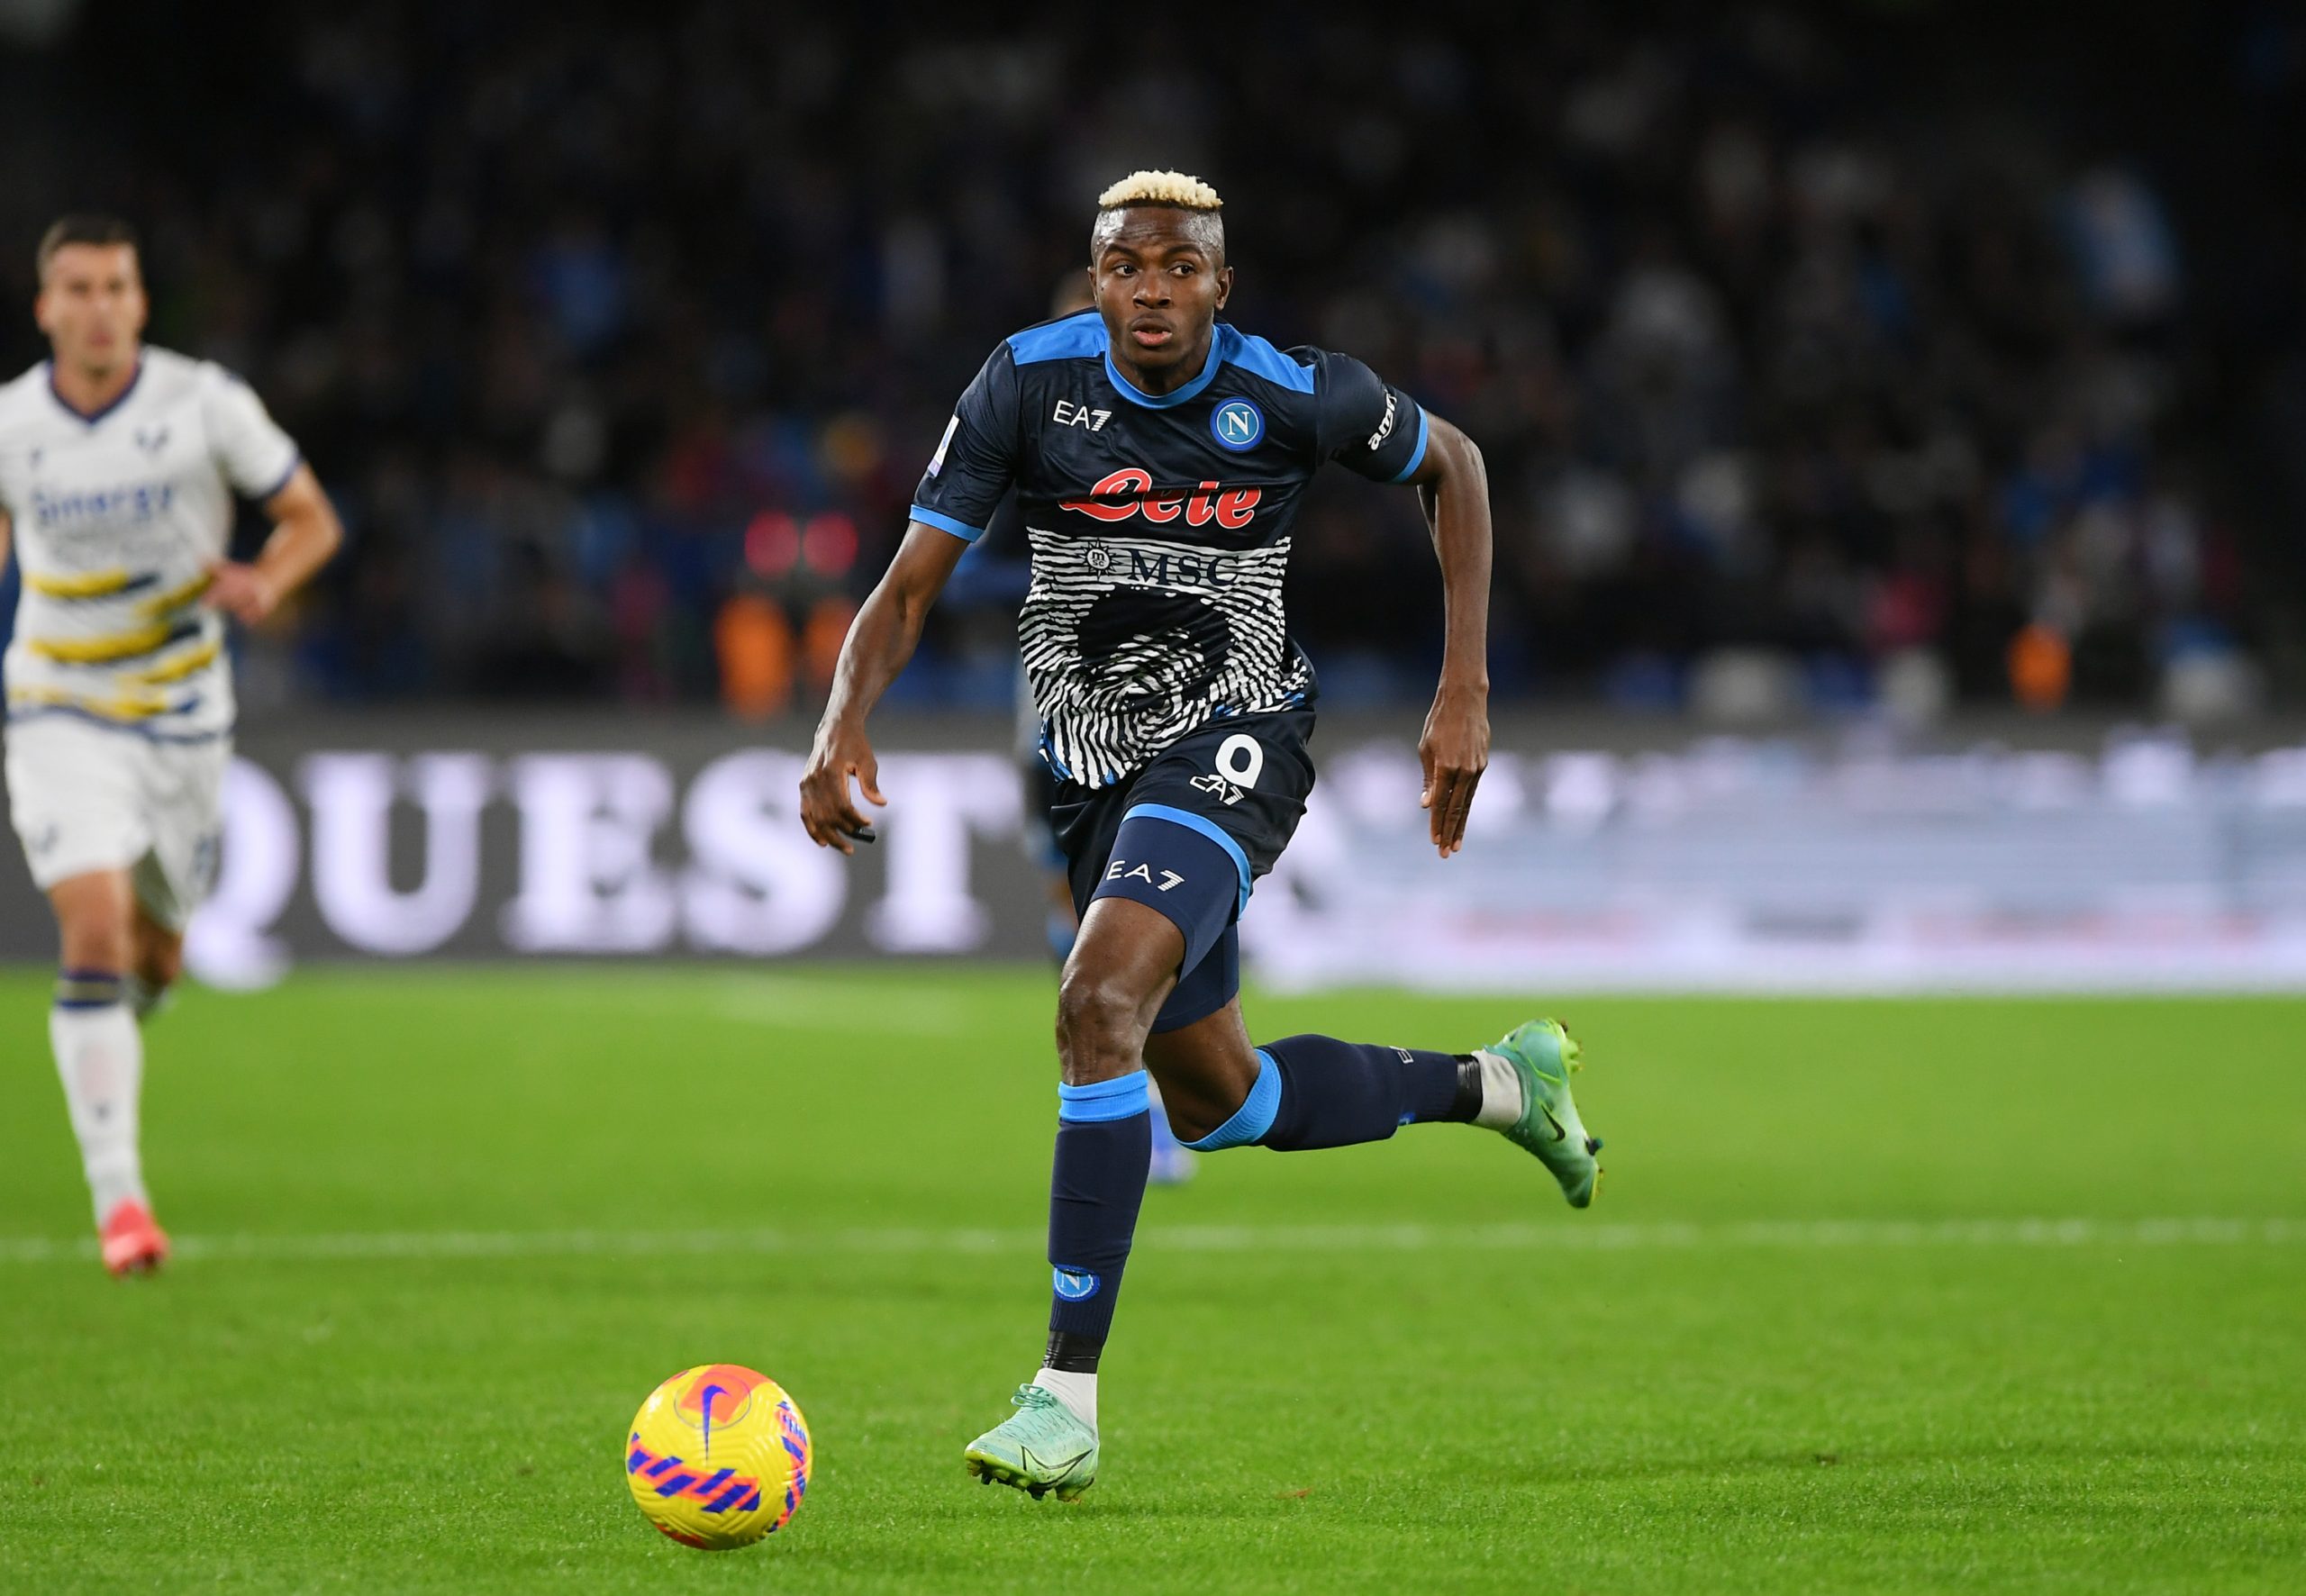 Player involved in Victor Osimhen transfer to Napoli says he has “never  been” to Lille – Get French Football News